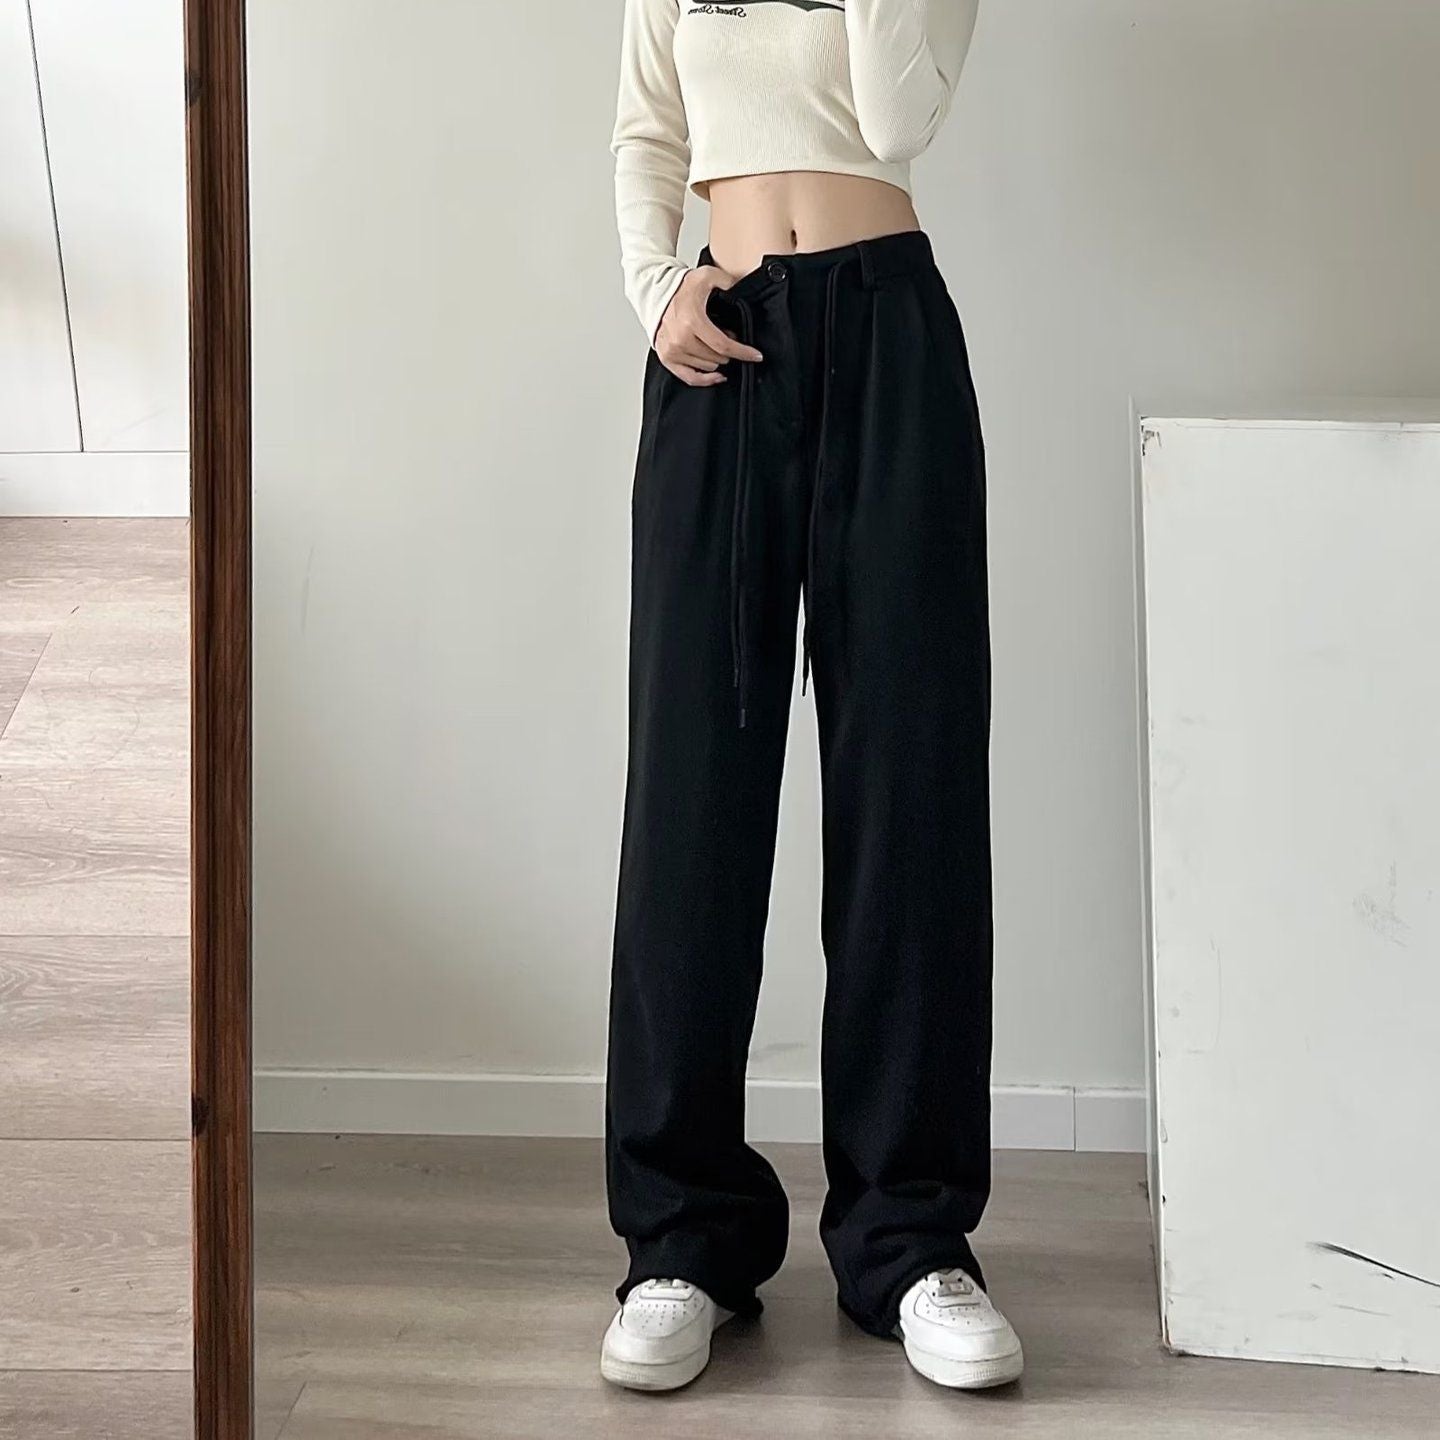 High Waist Drooping Drawstring Mop Slightly Spicy Sweatpants Sports Pants Female Loose Wide-leg Pants For Women